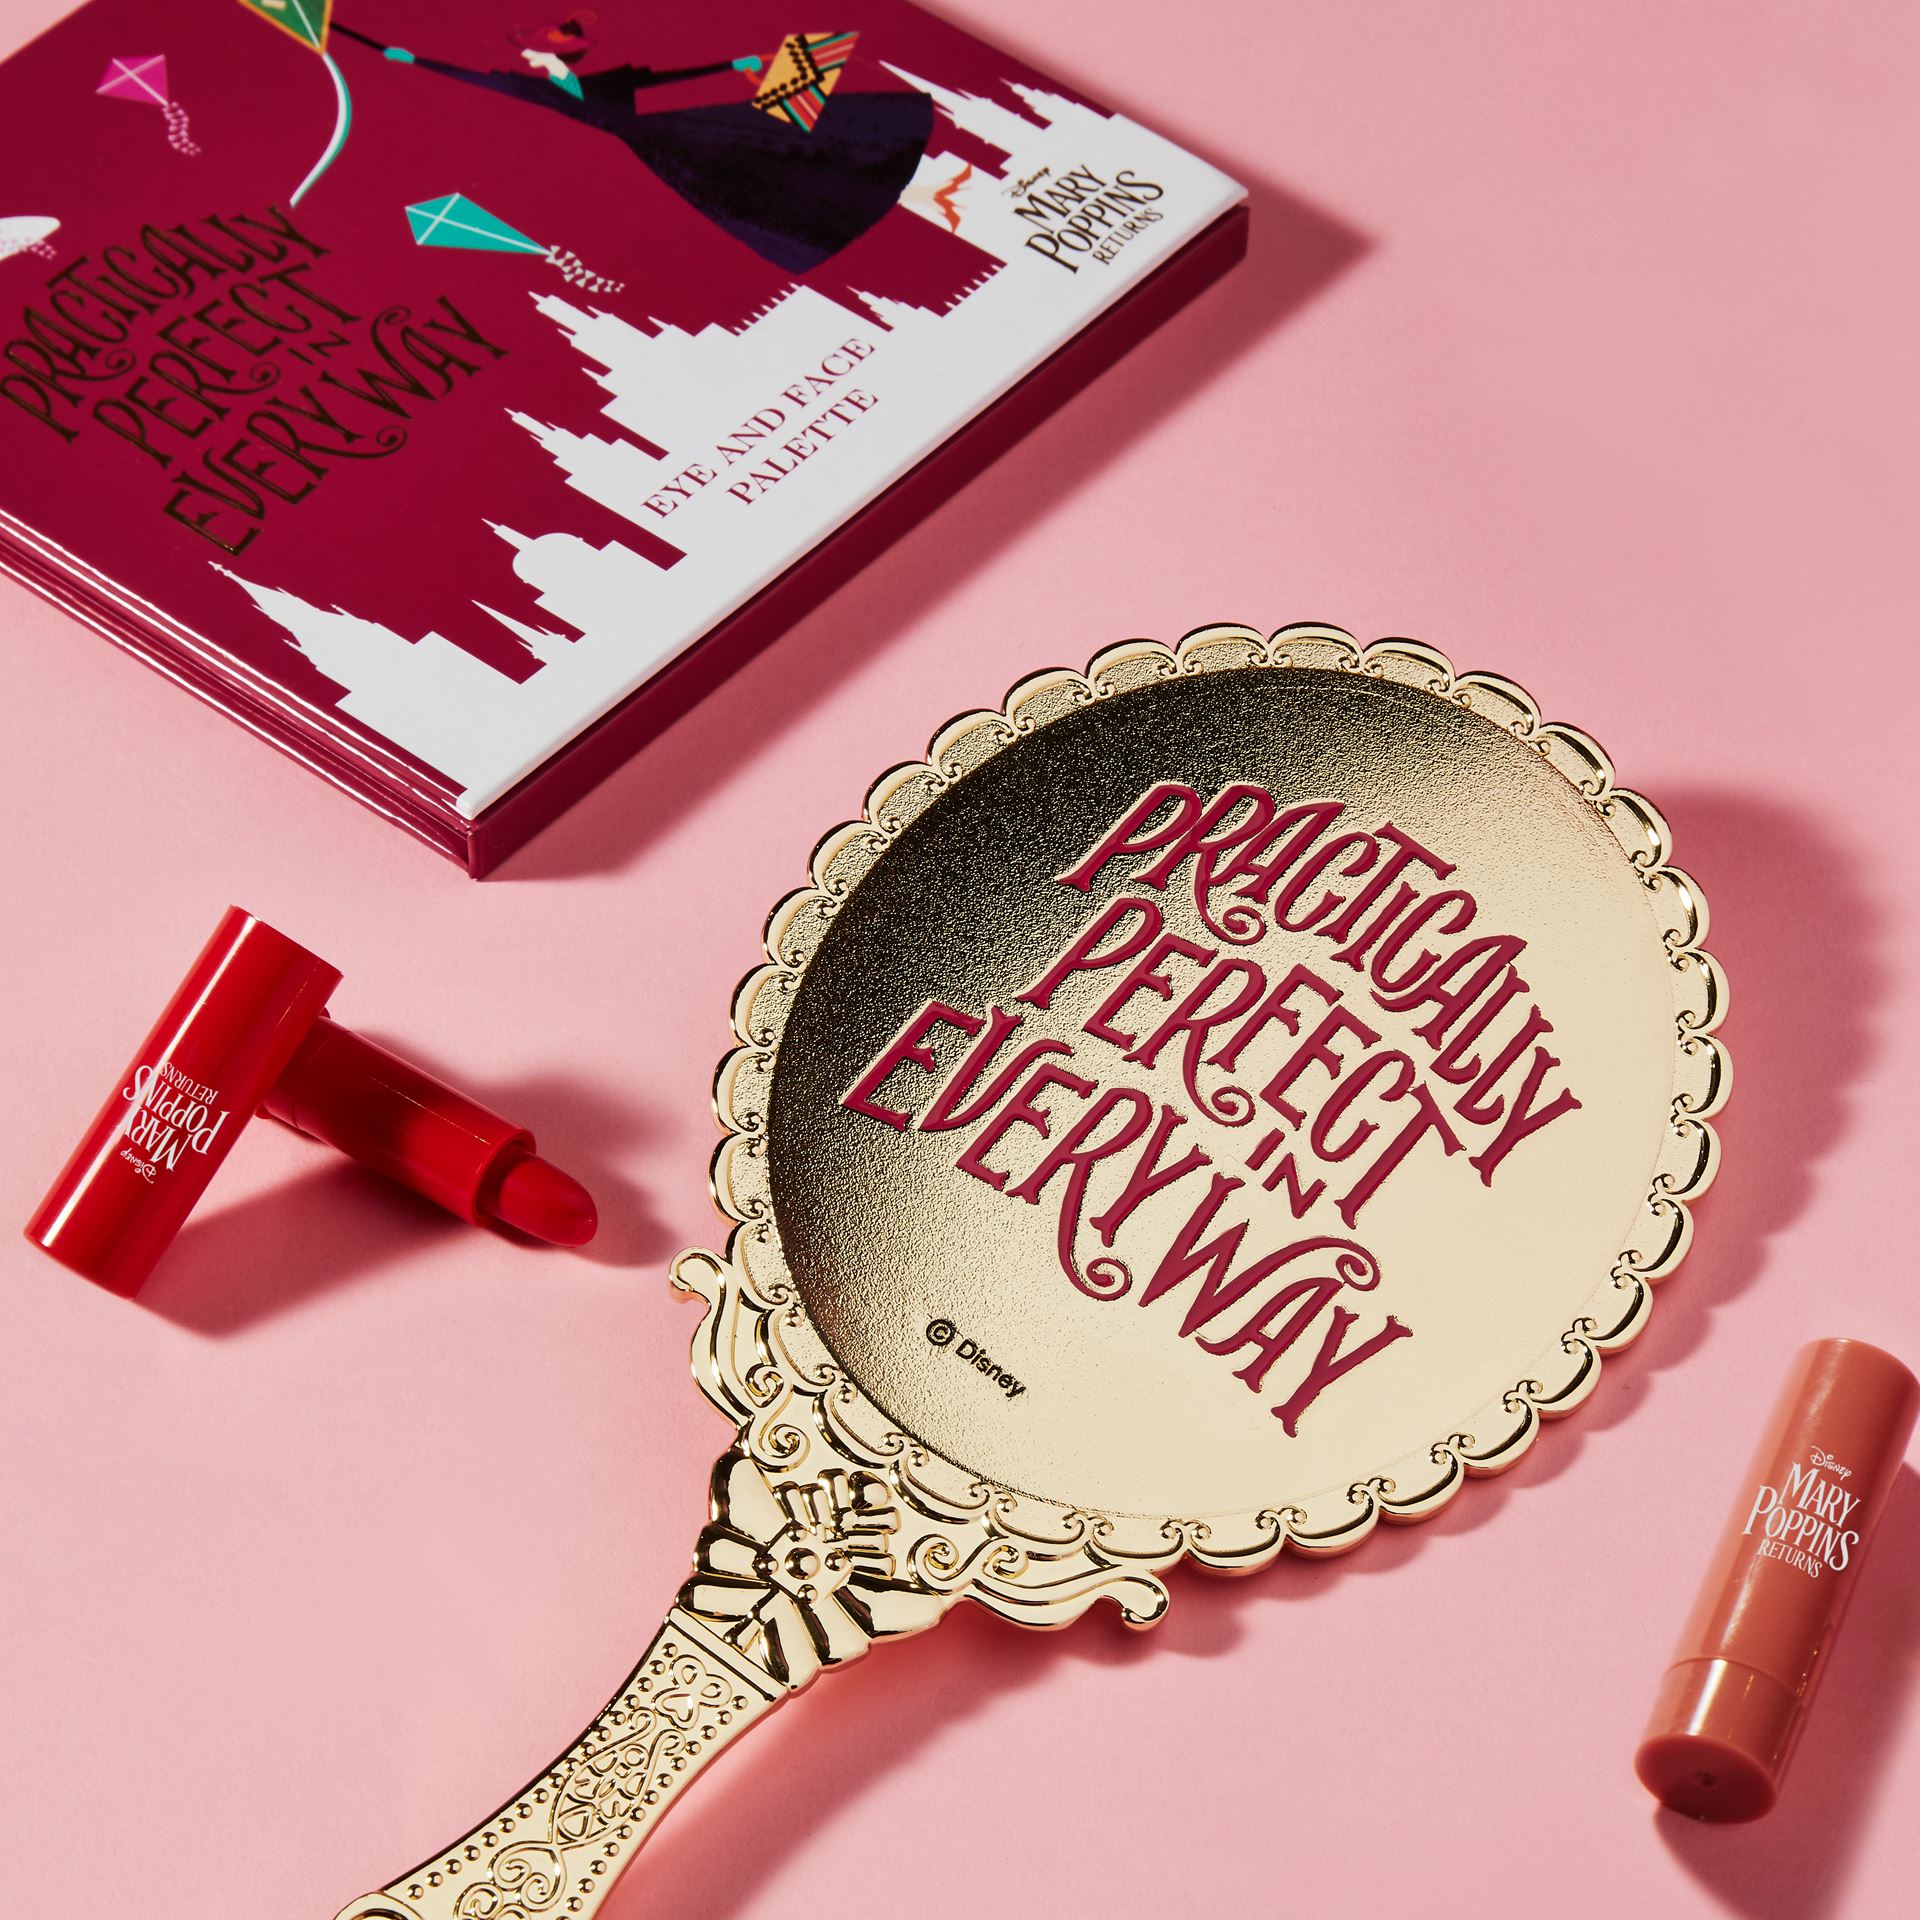 Mary Poppins Beauty Gifts